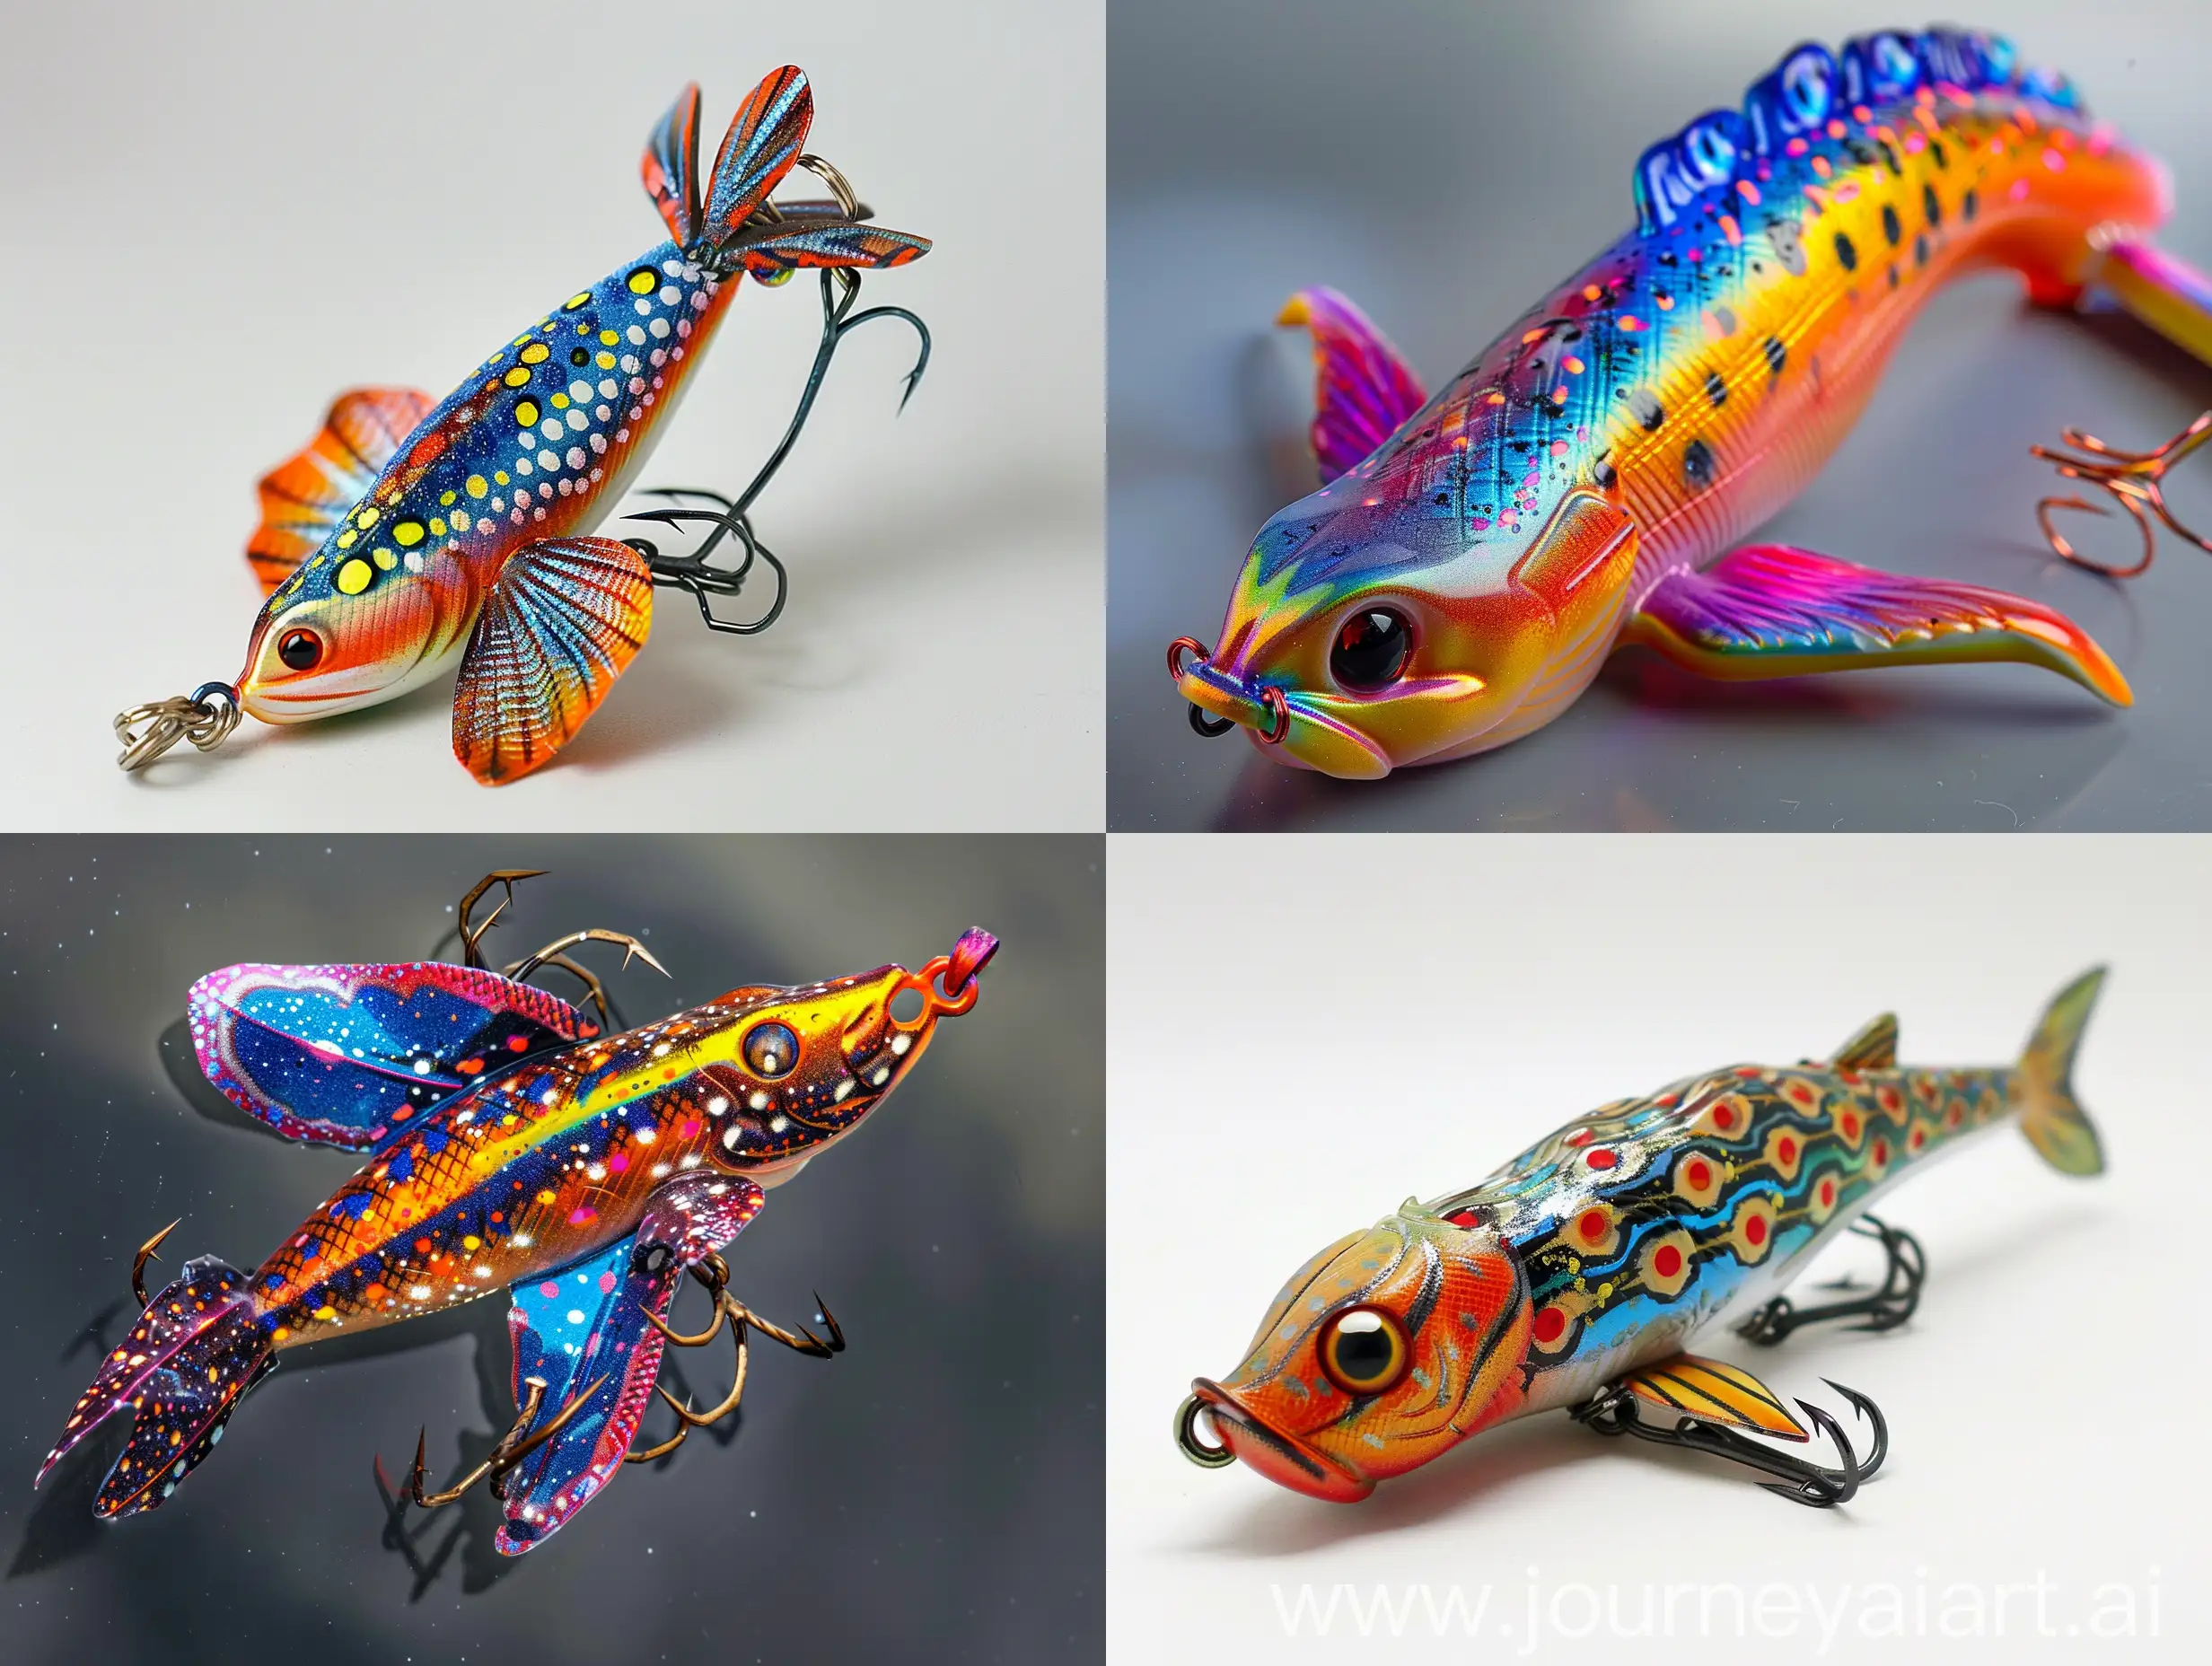 Vibrant-Modern-Artificial-Lure-with-Airbrushed-Details-and-Color-Pigments